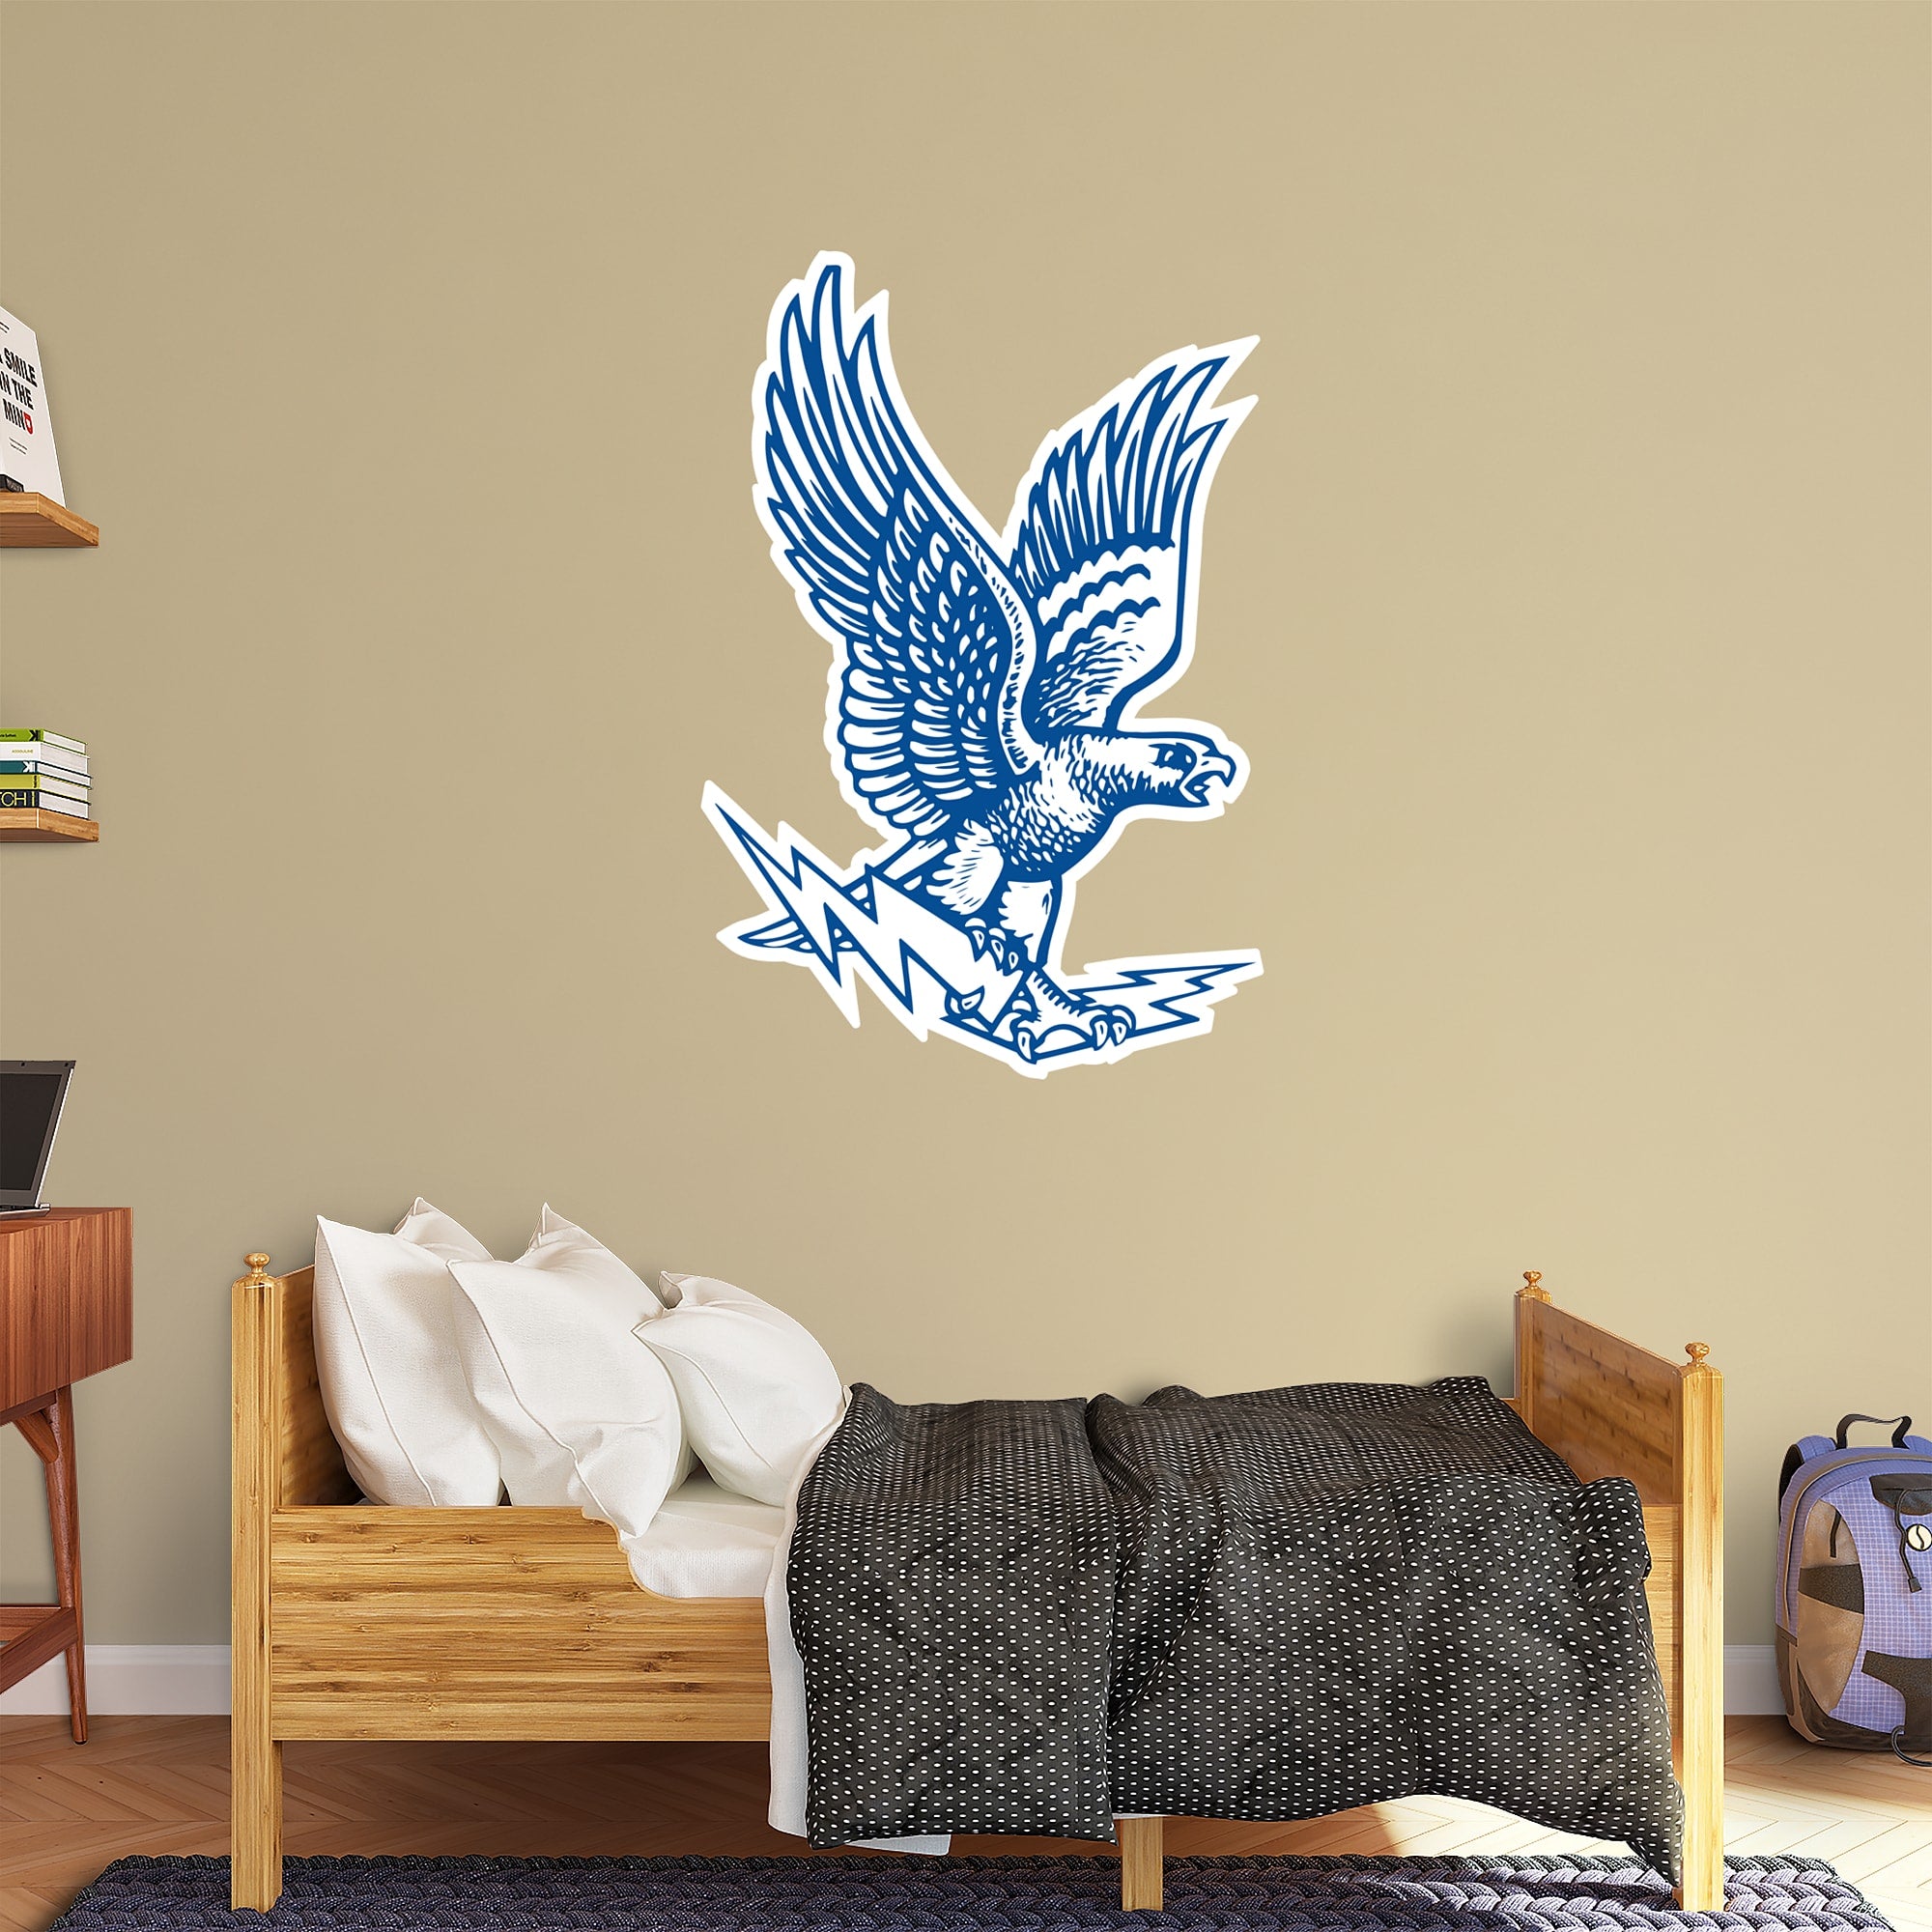 Air Force Falcons: Falcon Logo - Officially Licensed Removable Wall Decal 35.0"W x 51.0"H by Fathead | Vinyl